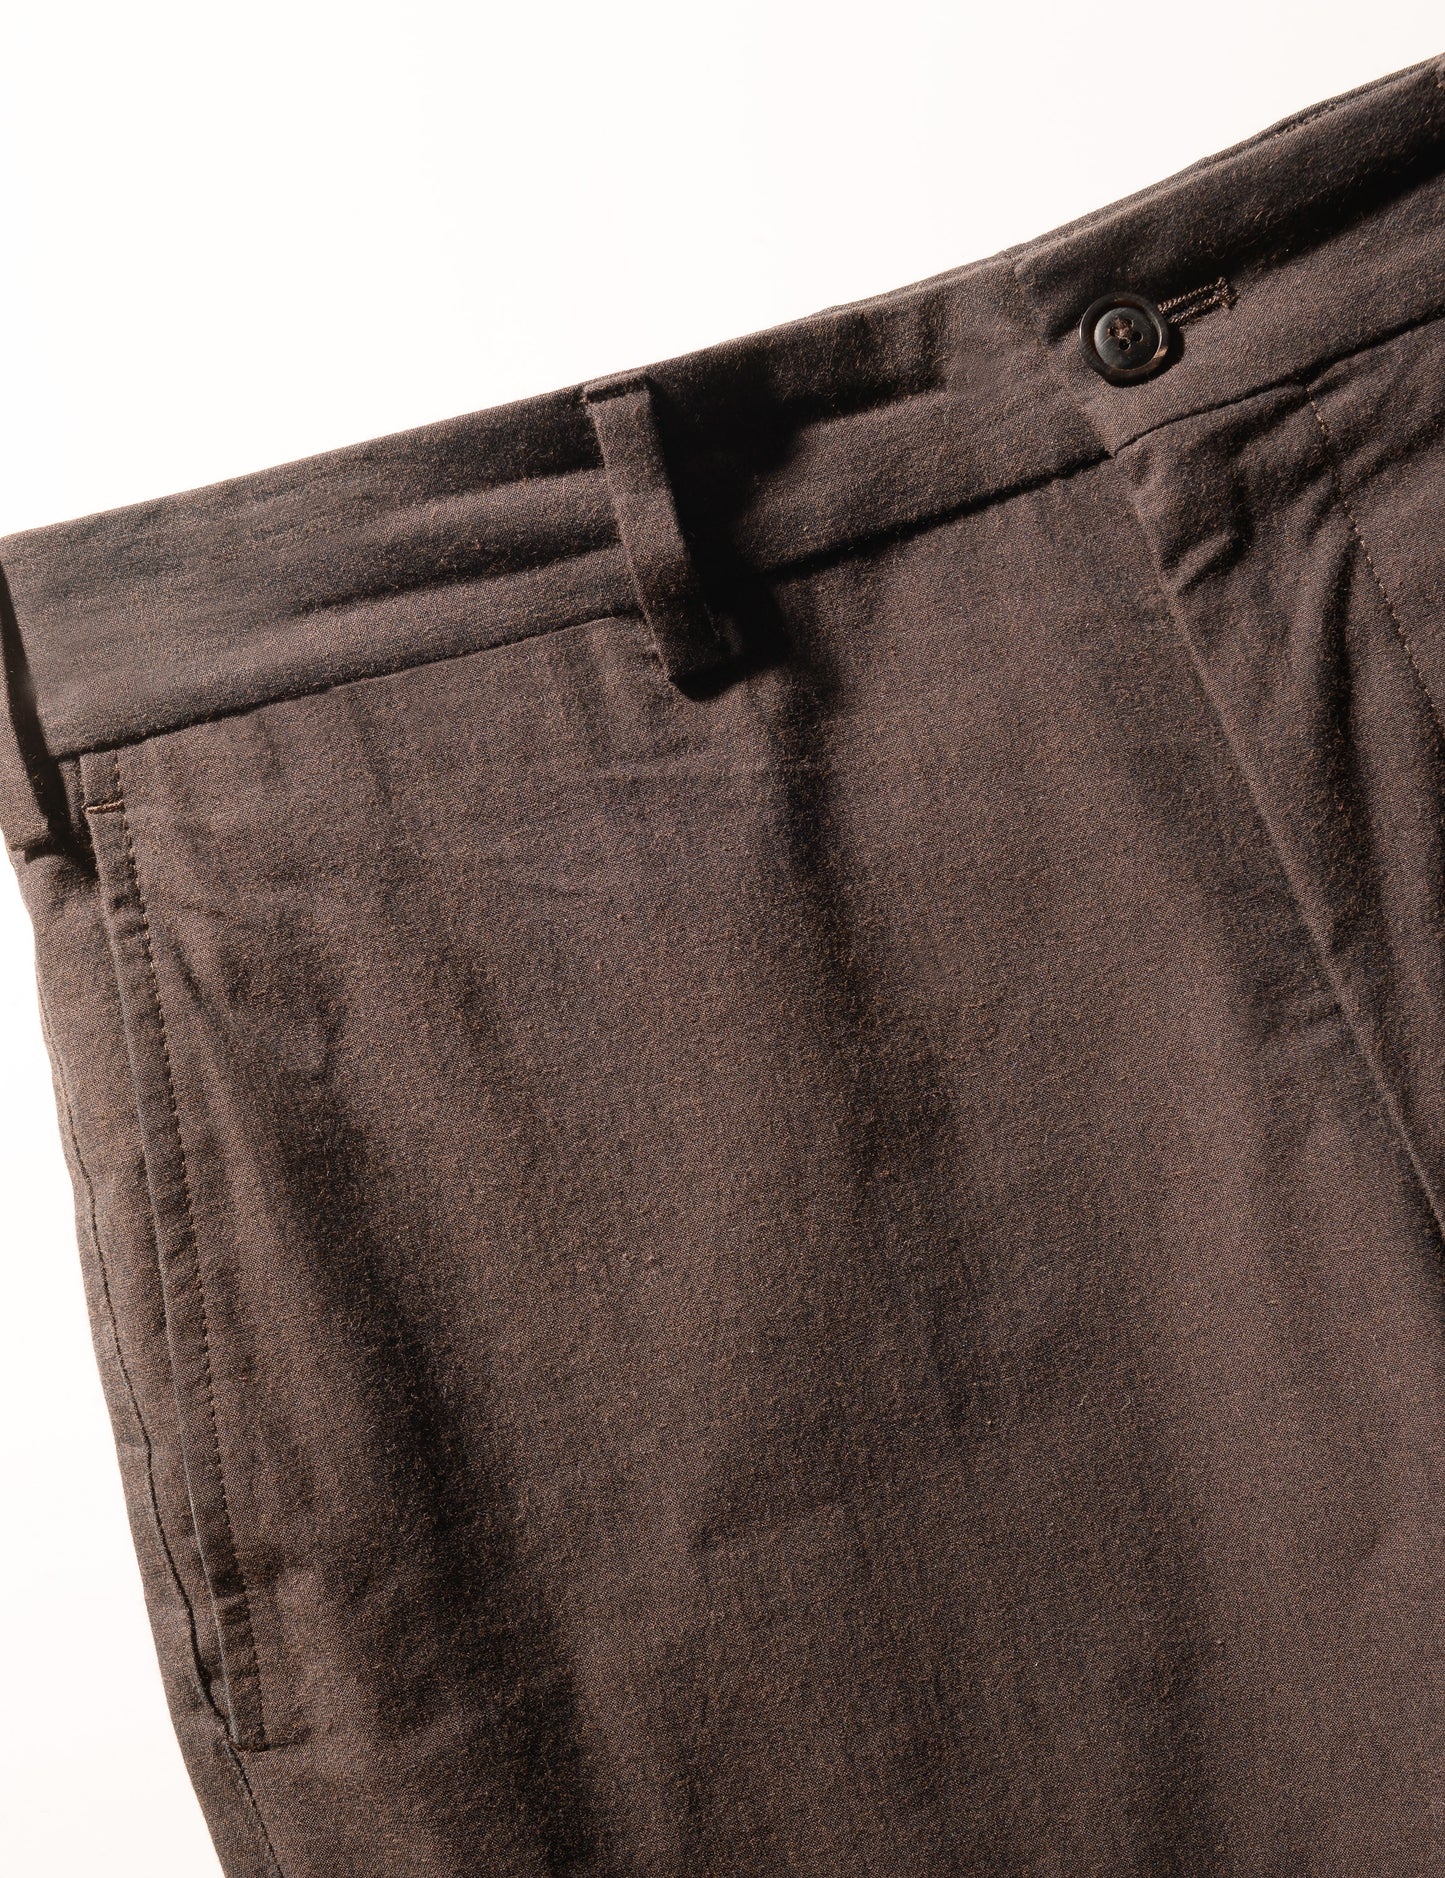 Detail shot showing waistband, pocket , and fabric texture on Brooklyn Tailors BKT36 Straight Leg Pant in Crisp Cotton Blend - Walnut